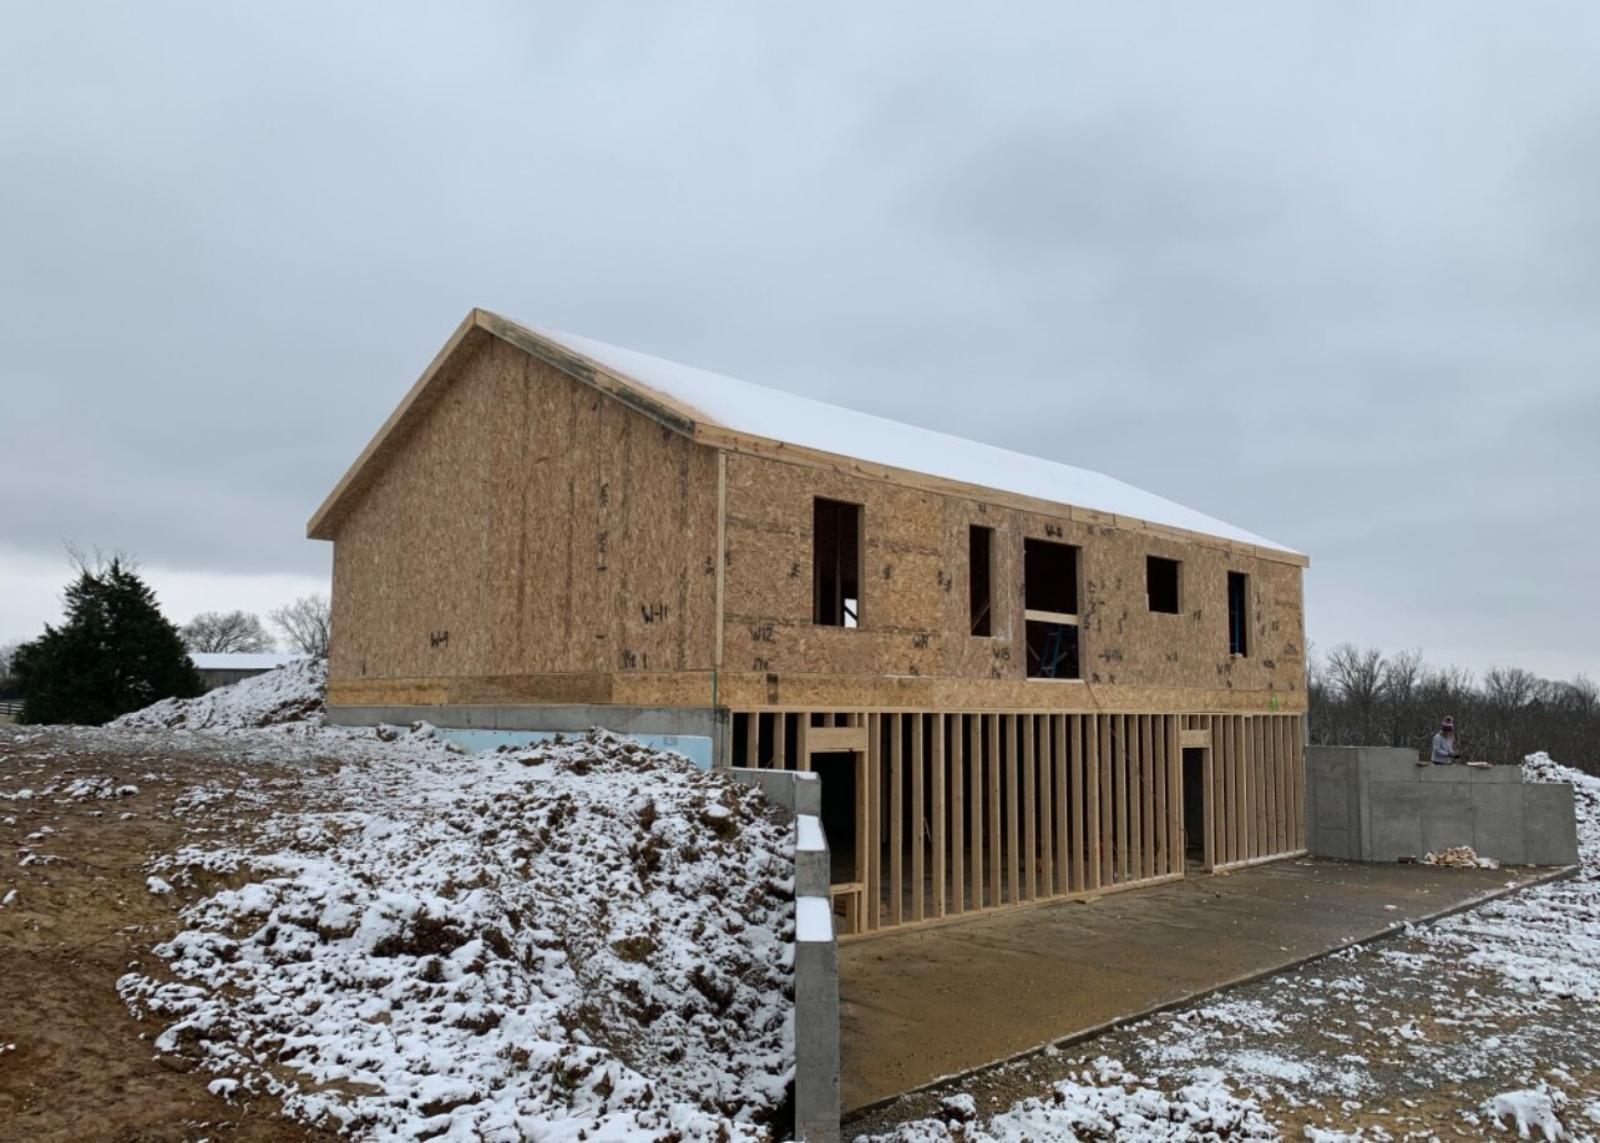 A house under construction with roof sheathing completed and basement framing visible.